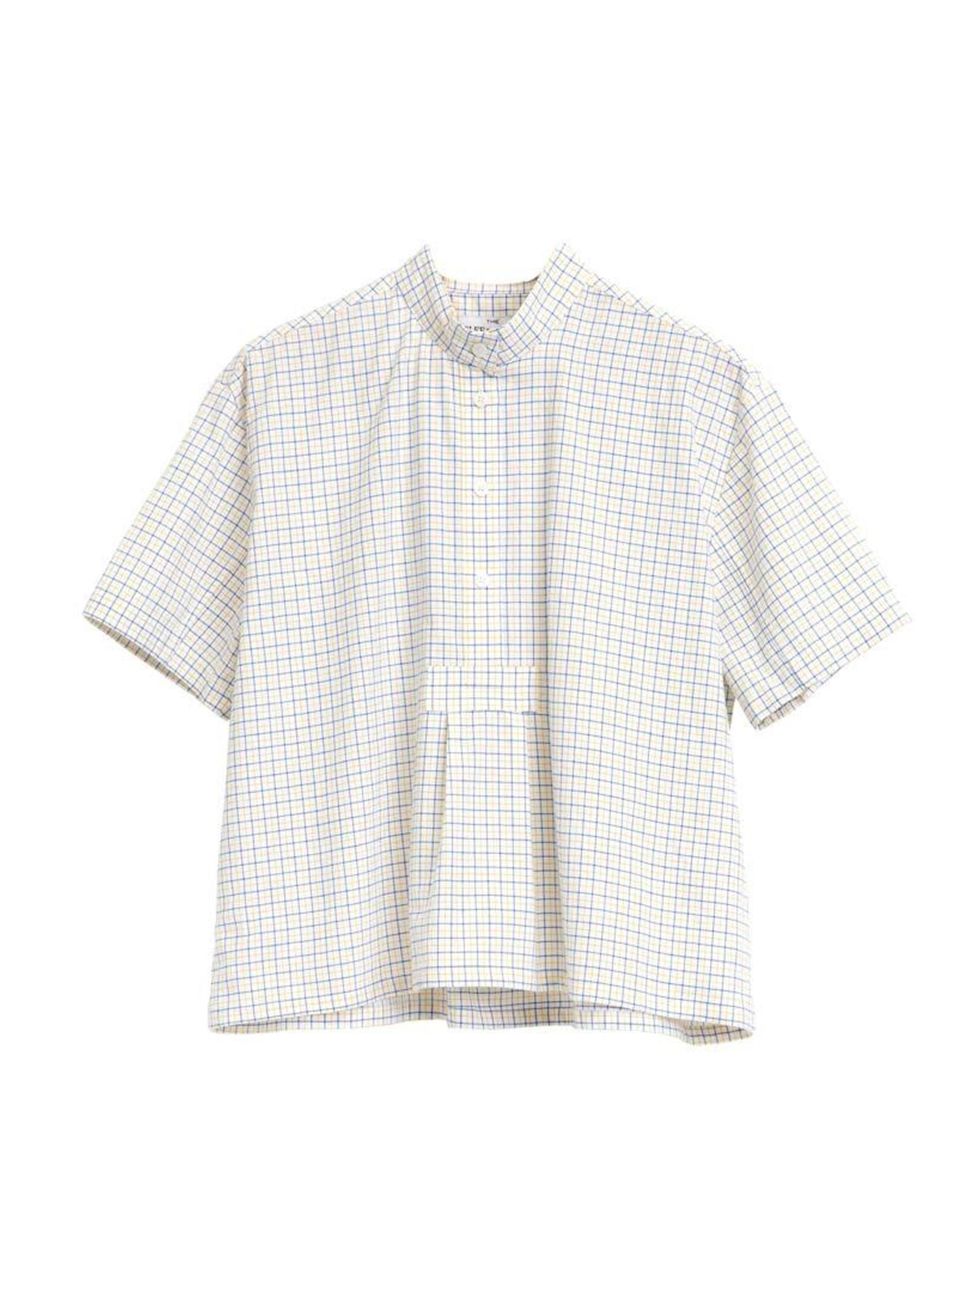 <p>Pyjamas that you can wear to work - what's not to like?</p>

<p>The Sleep Shirt top, £175 at <a href="http://www.selfridges.com/en/the-sleep-shirt-short-sleeved-sleep-shirt_211-3004217-305/?previewAttribute=Blue+and+maize+check" target="_blank">Selfrid